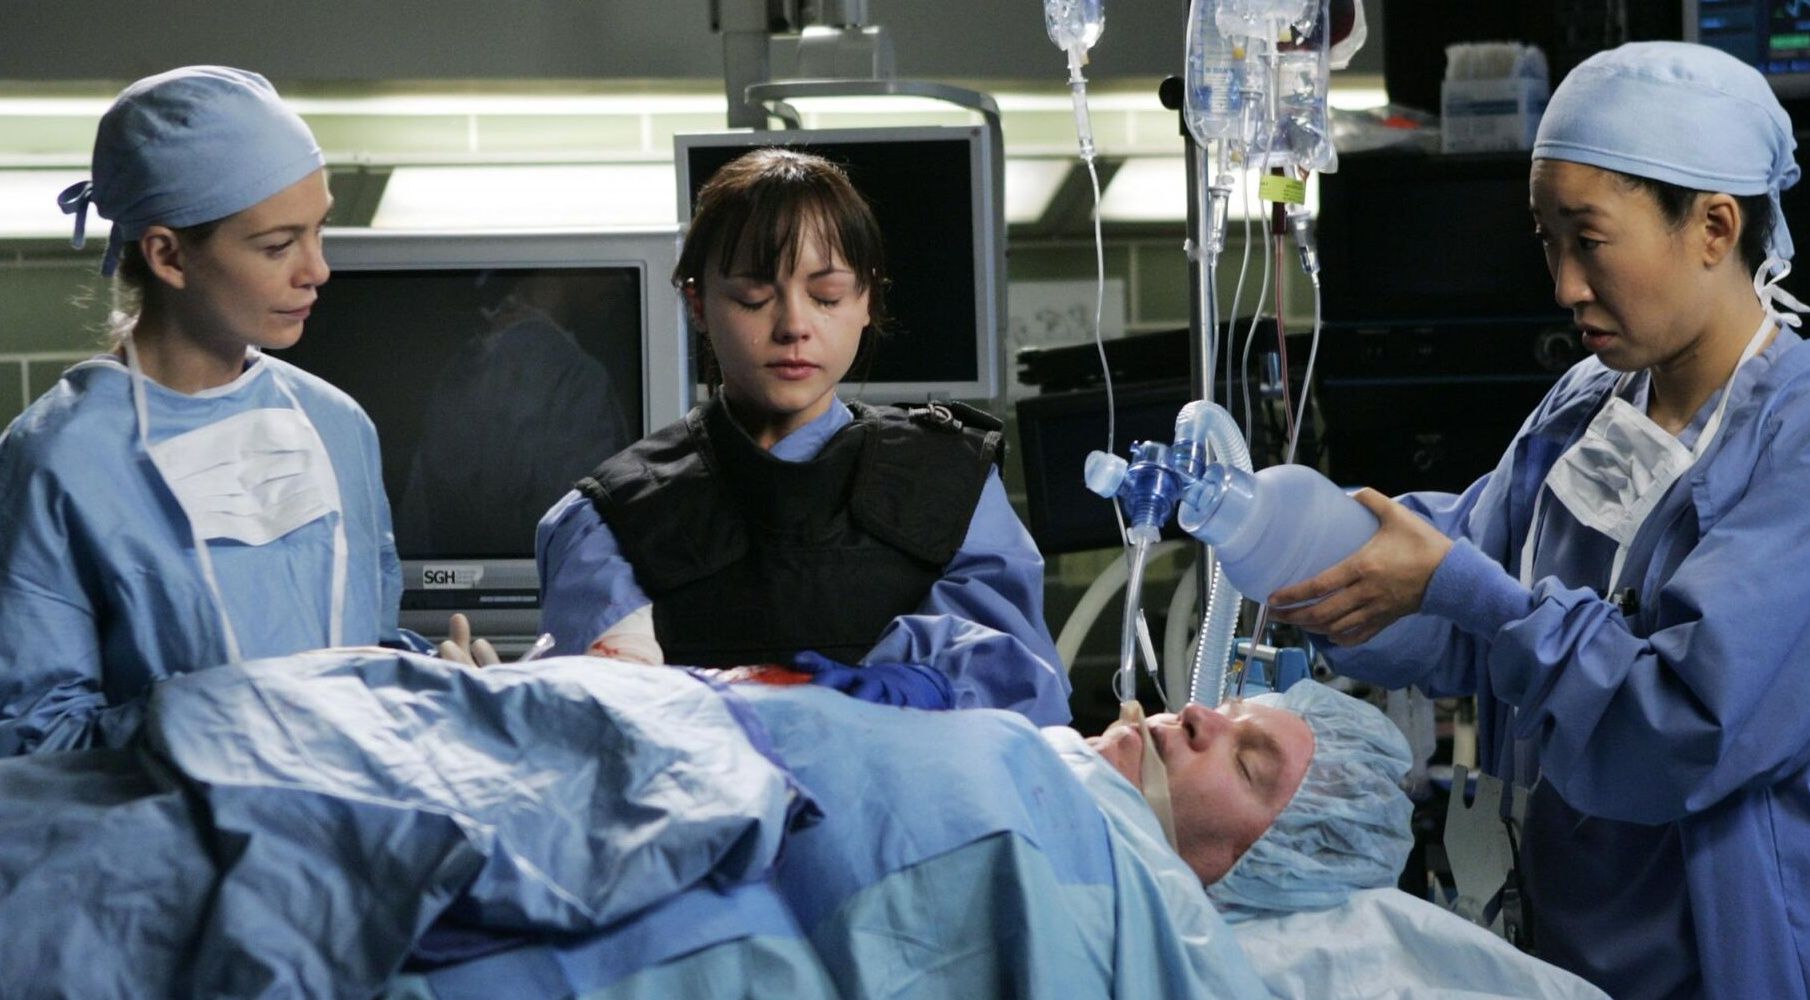 Greys Anatomy 10 Most Shameless Things Meredith Ever Did (& Should Be Proud Of)